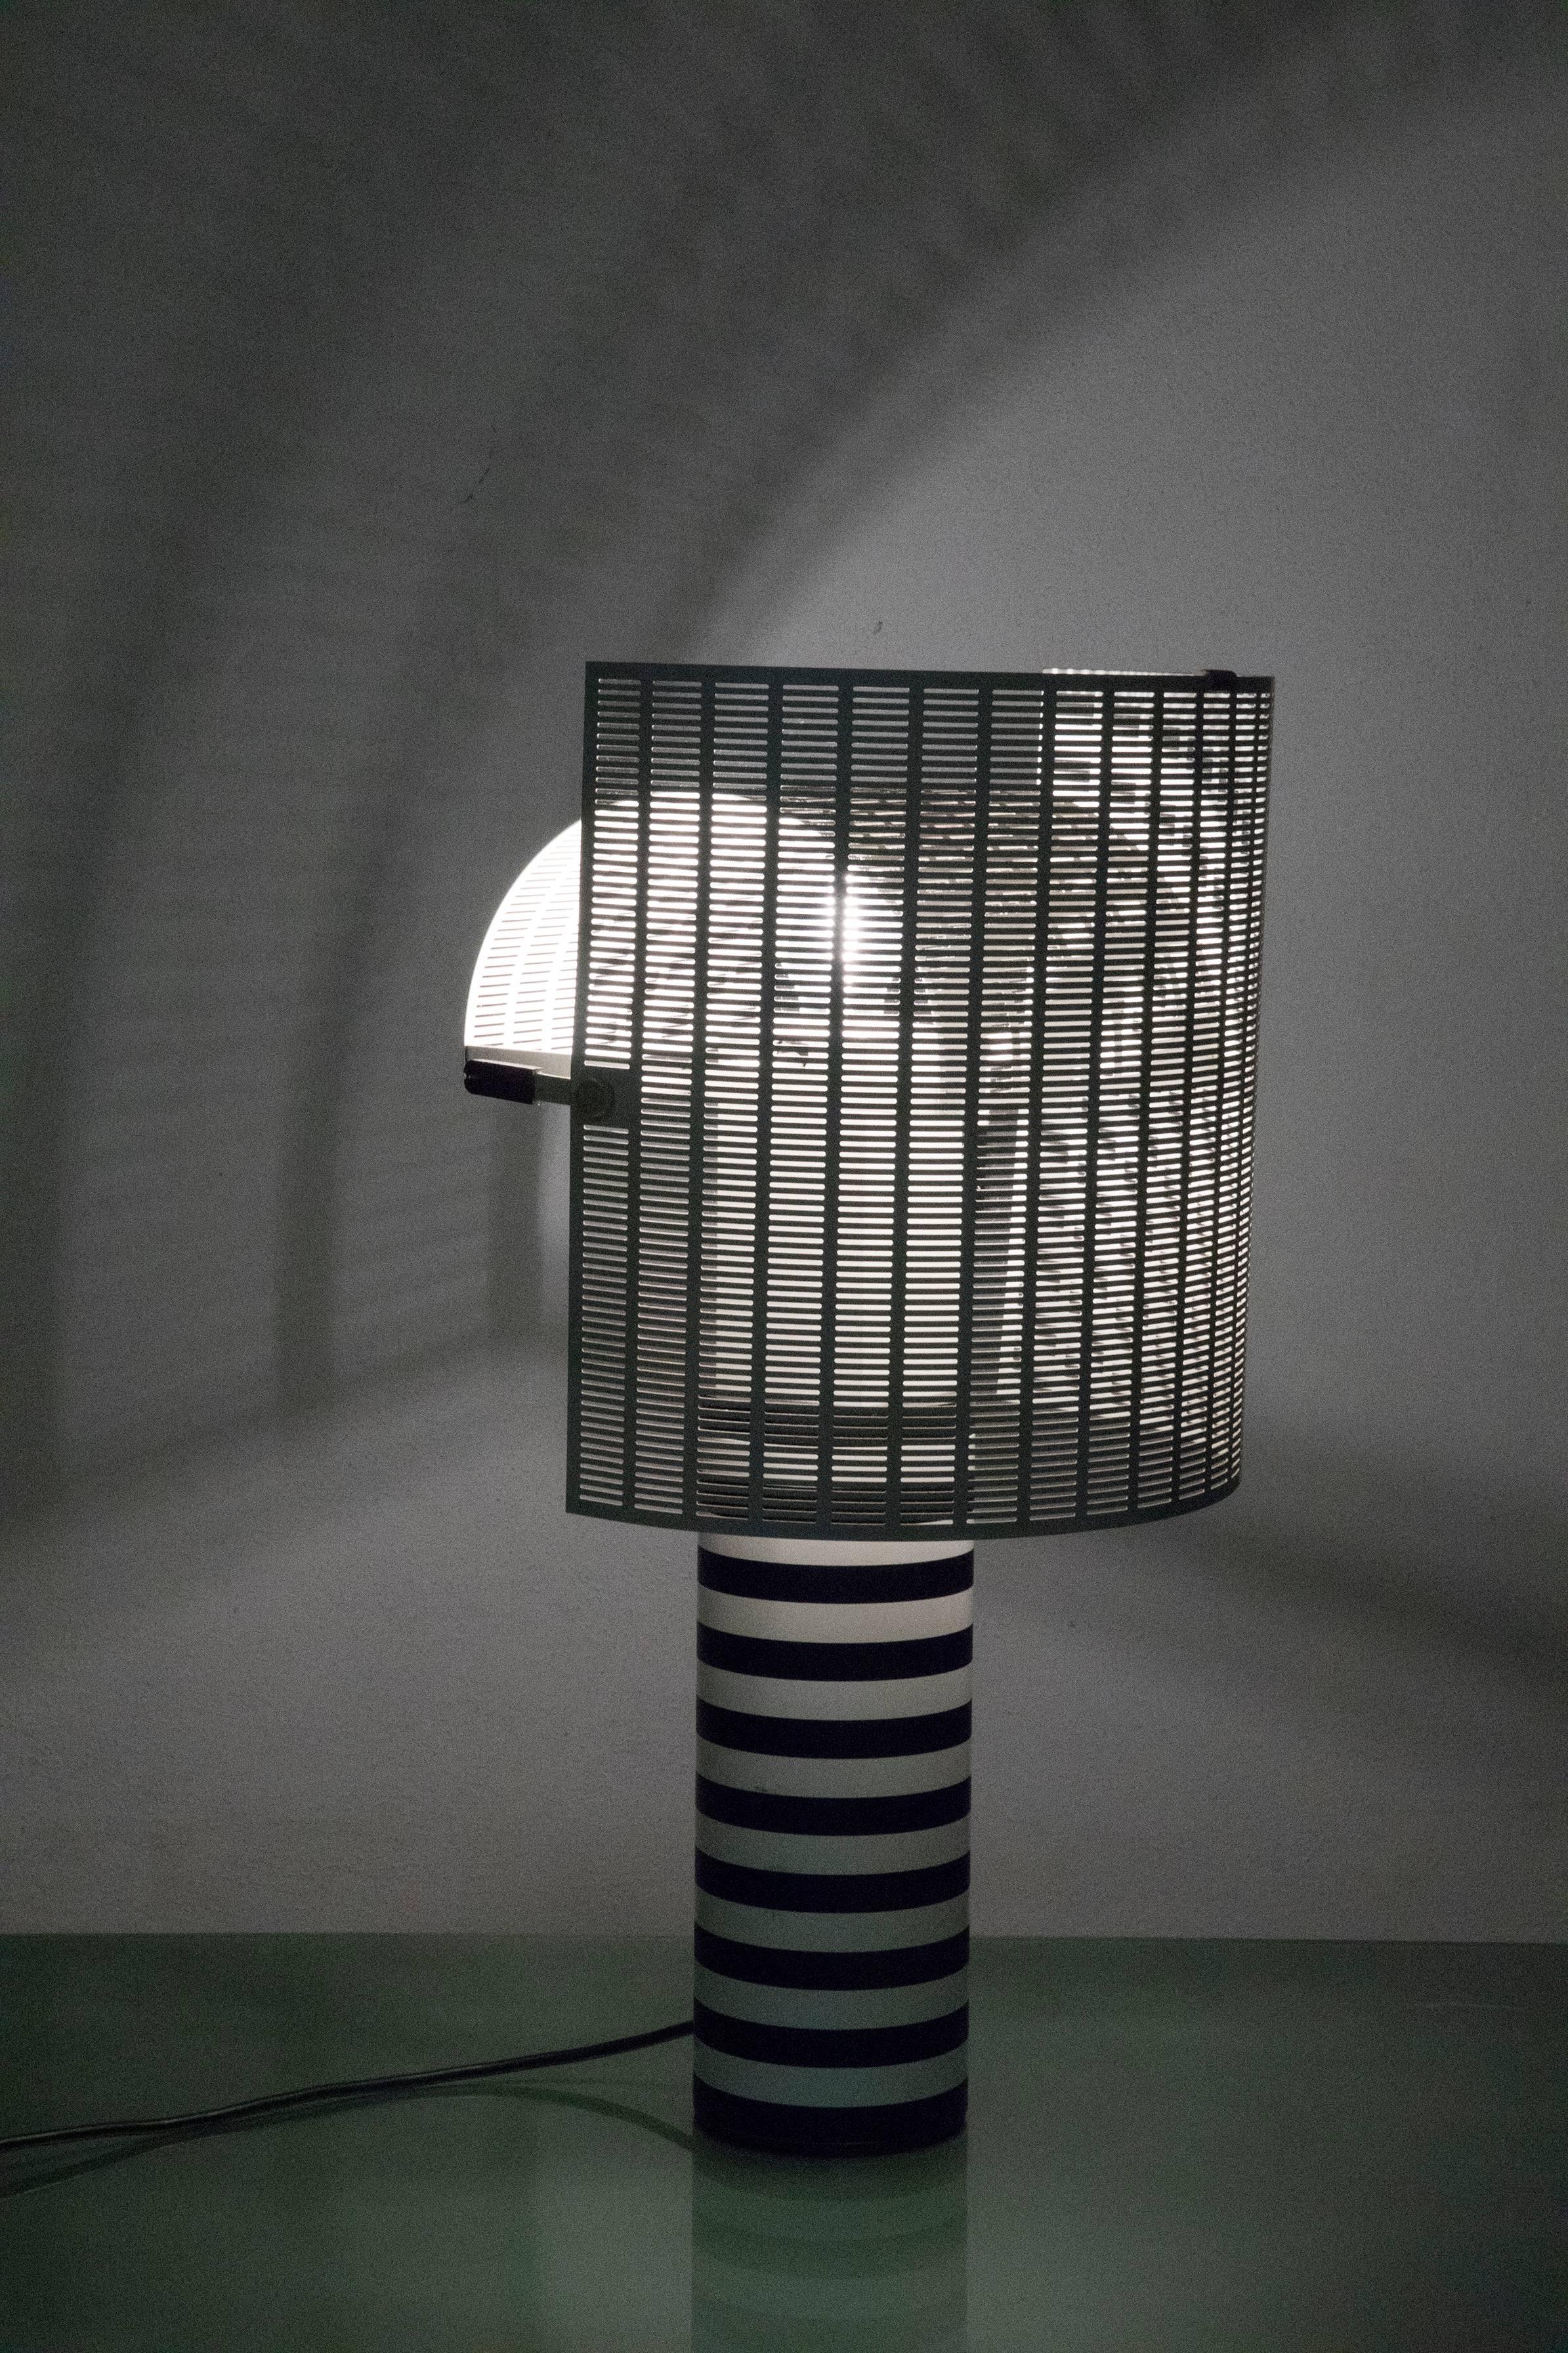 Italian table lamp designed by Mario Botta in 1986 for Artemide and no longer in production.
The black base is made of cast iron, the powder coated shaft is black and white striped. Two curved perforated diffusers can be pivoted to create endless